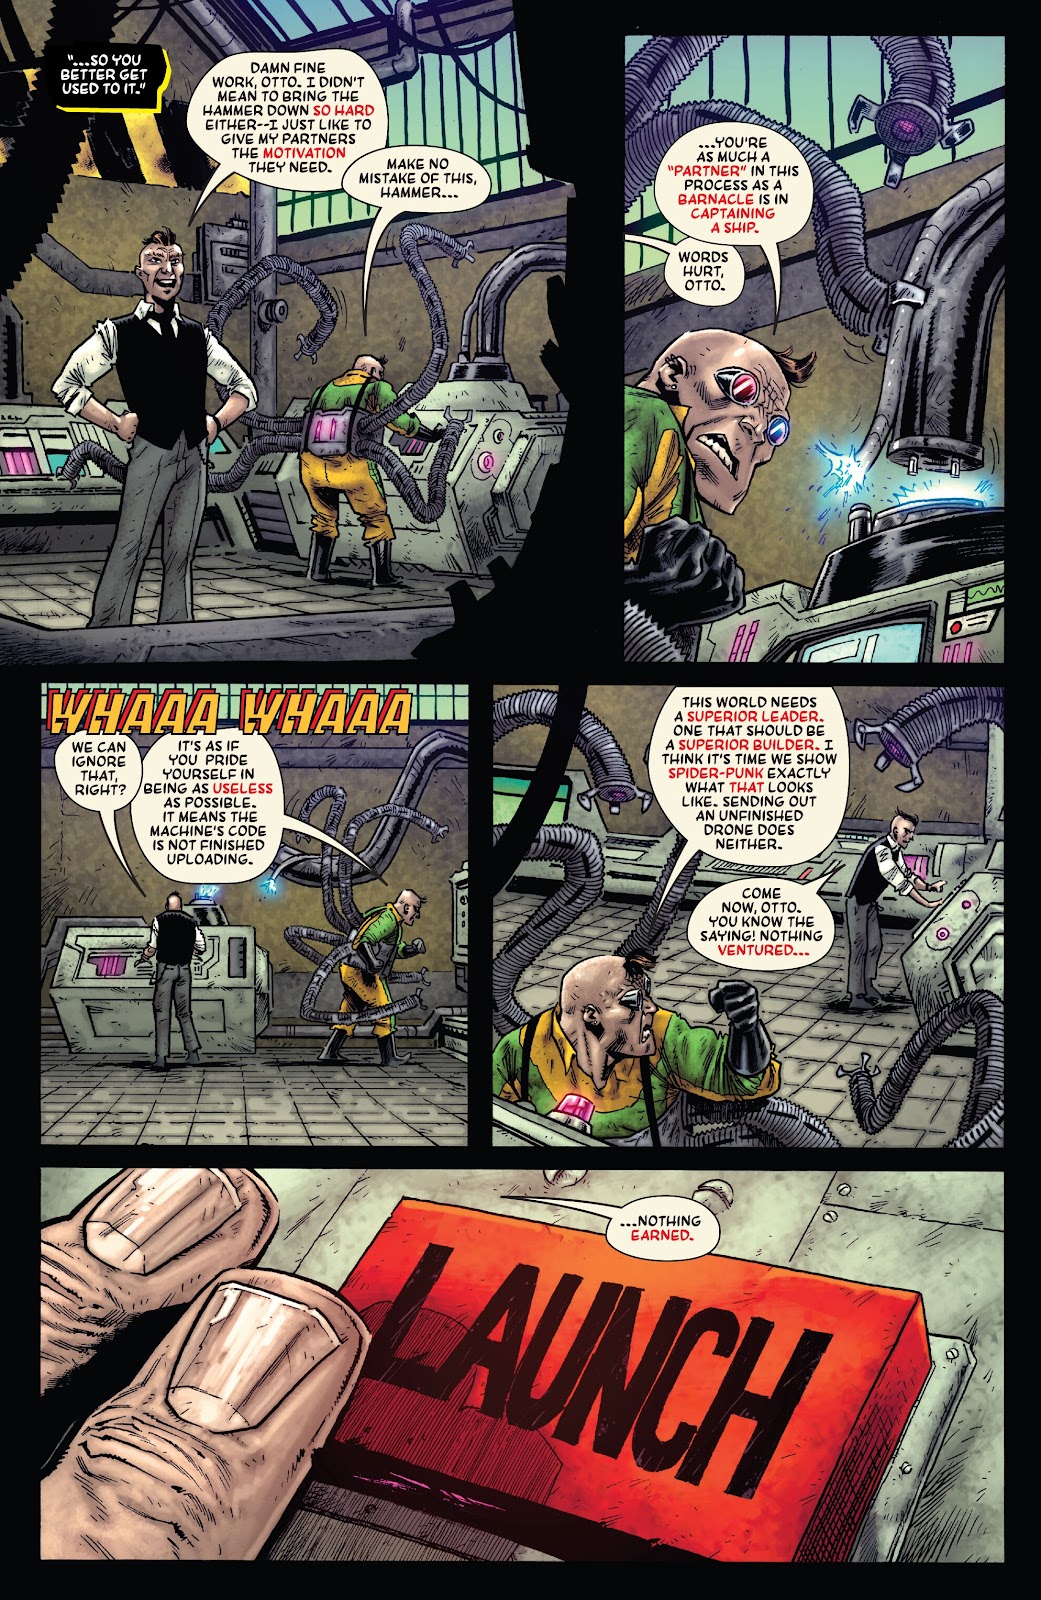 Spider-Punk: Arms Race issue 1 - Page 16